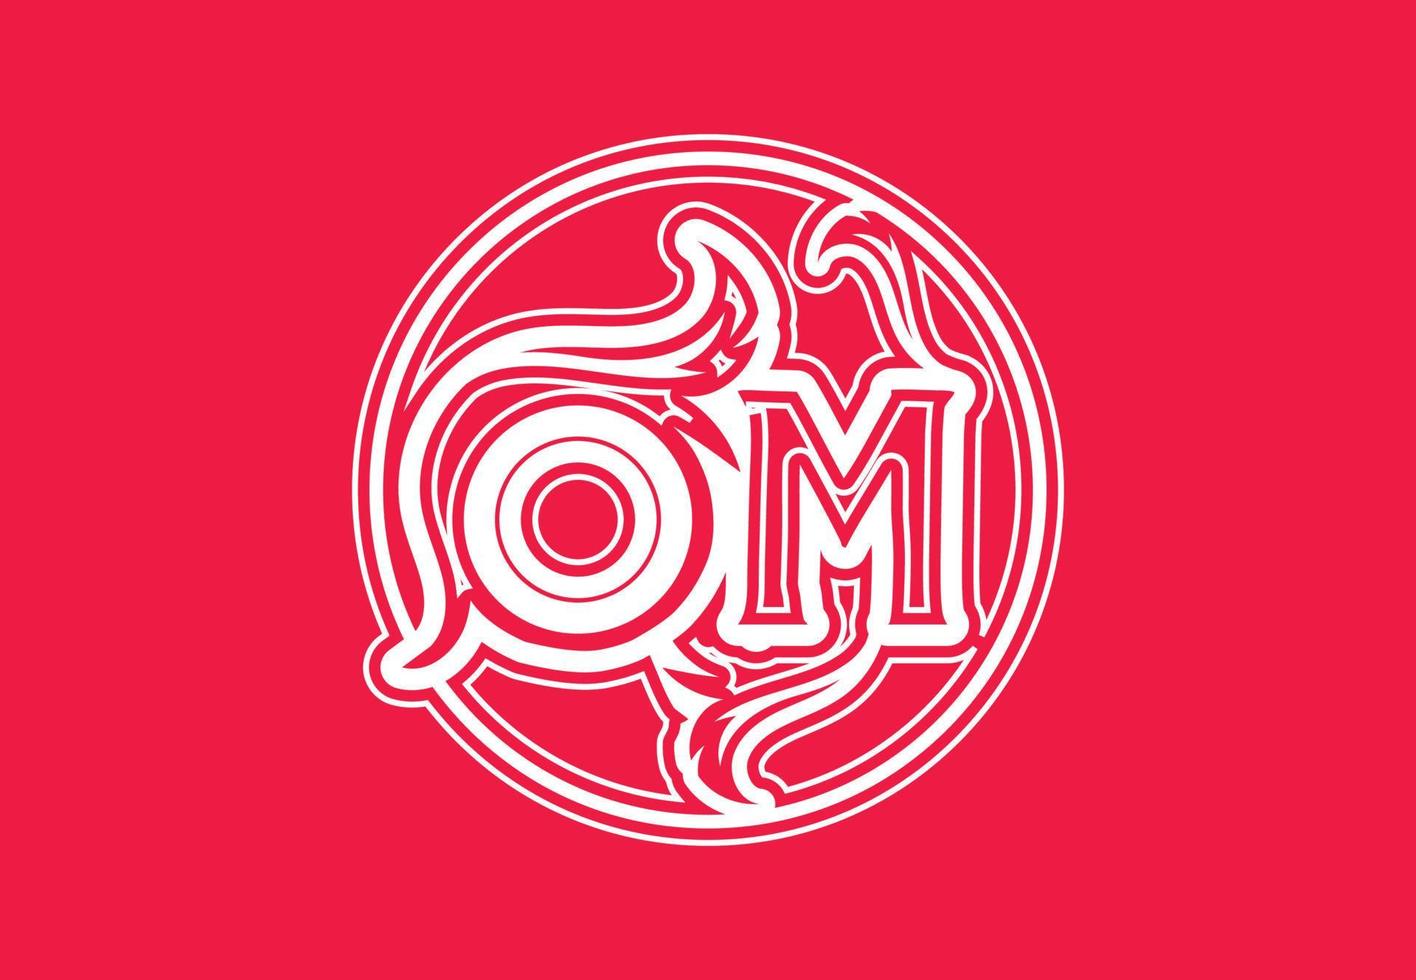 OM letter logo and icon design template vector